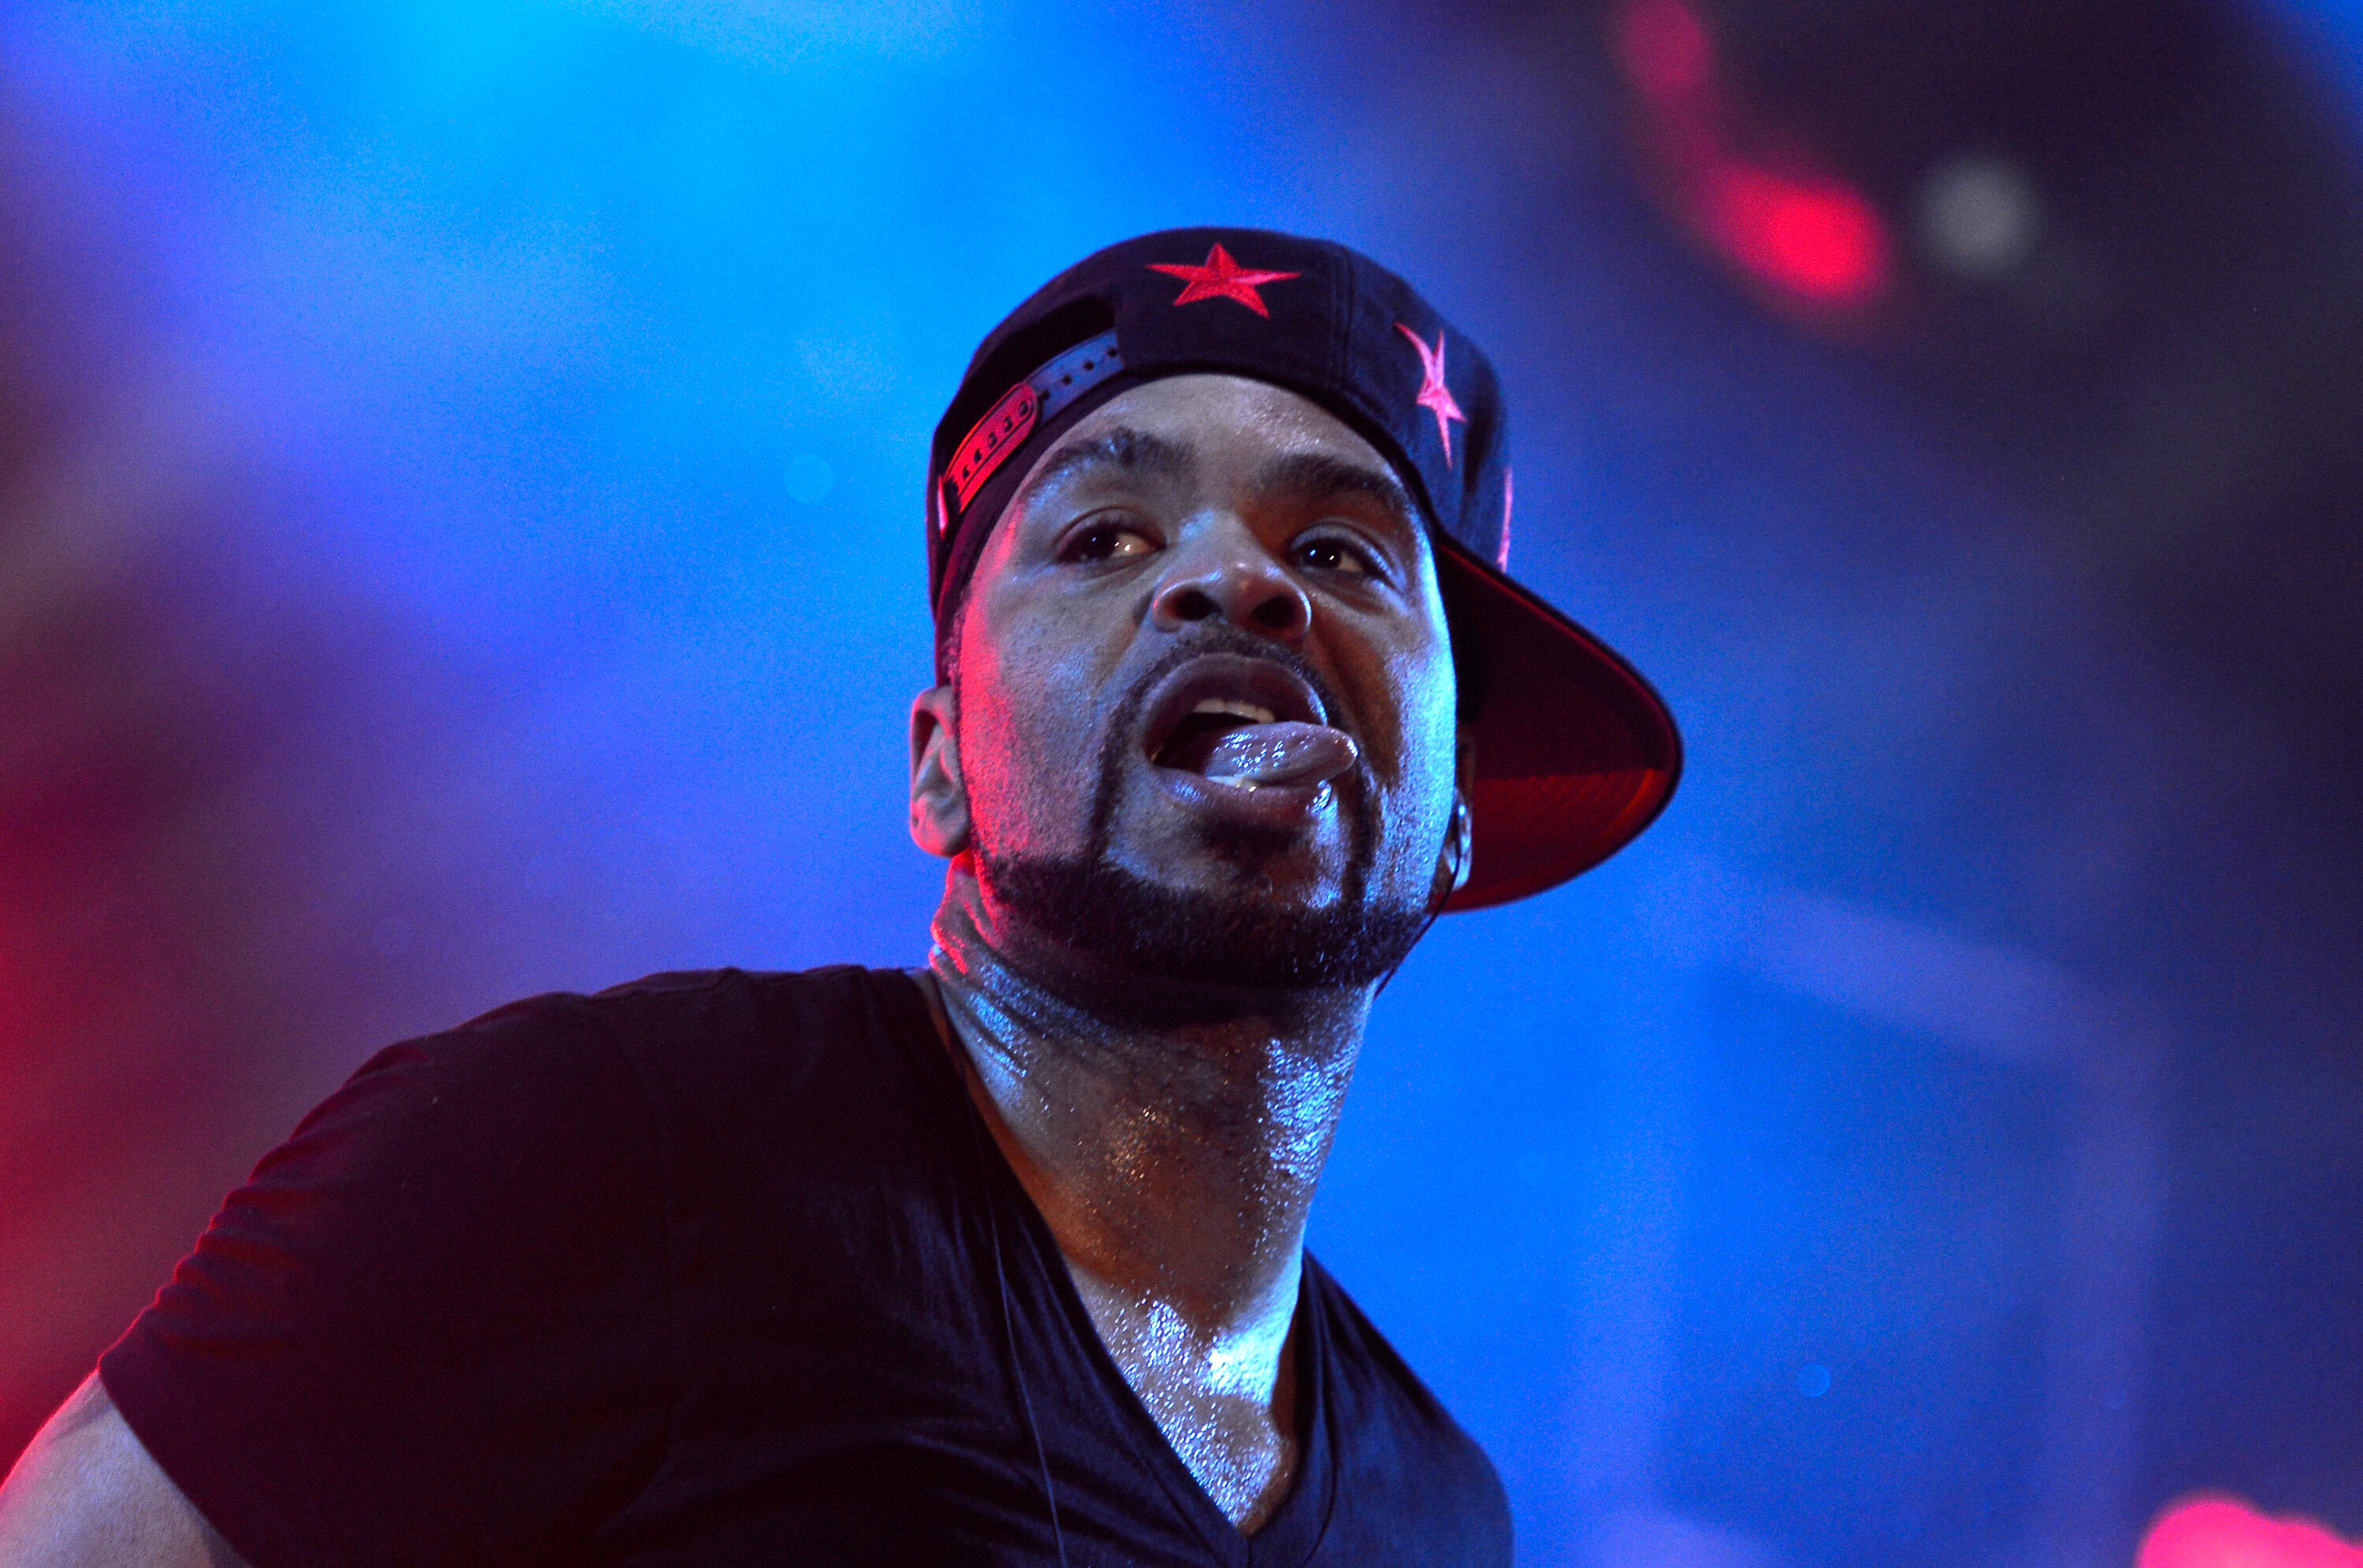 INDIO, CA - APRIL 14:  Method Man of Wu-Tang Clan performs onstage during day 3 of the 2013 Coachella Valley Music & Arts Festival at the Empire Polo Club on April 14, 2013 in Indio, California  (Photo by Frazer Harrison/Getty Images for Coachella)